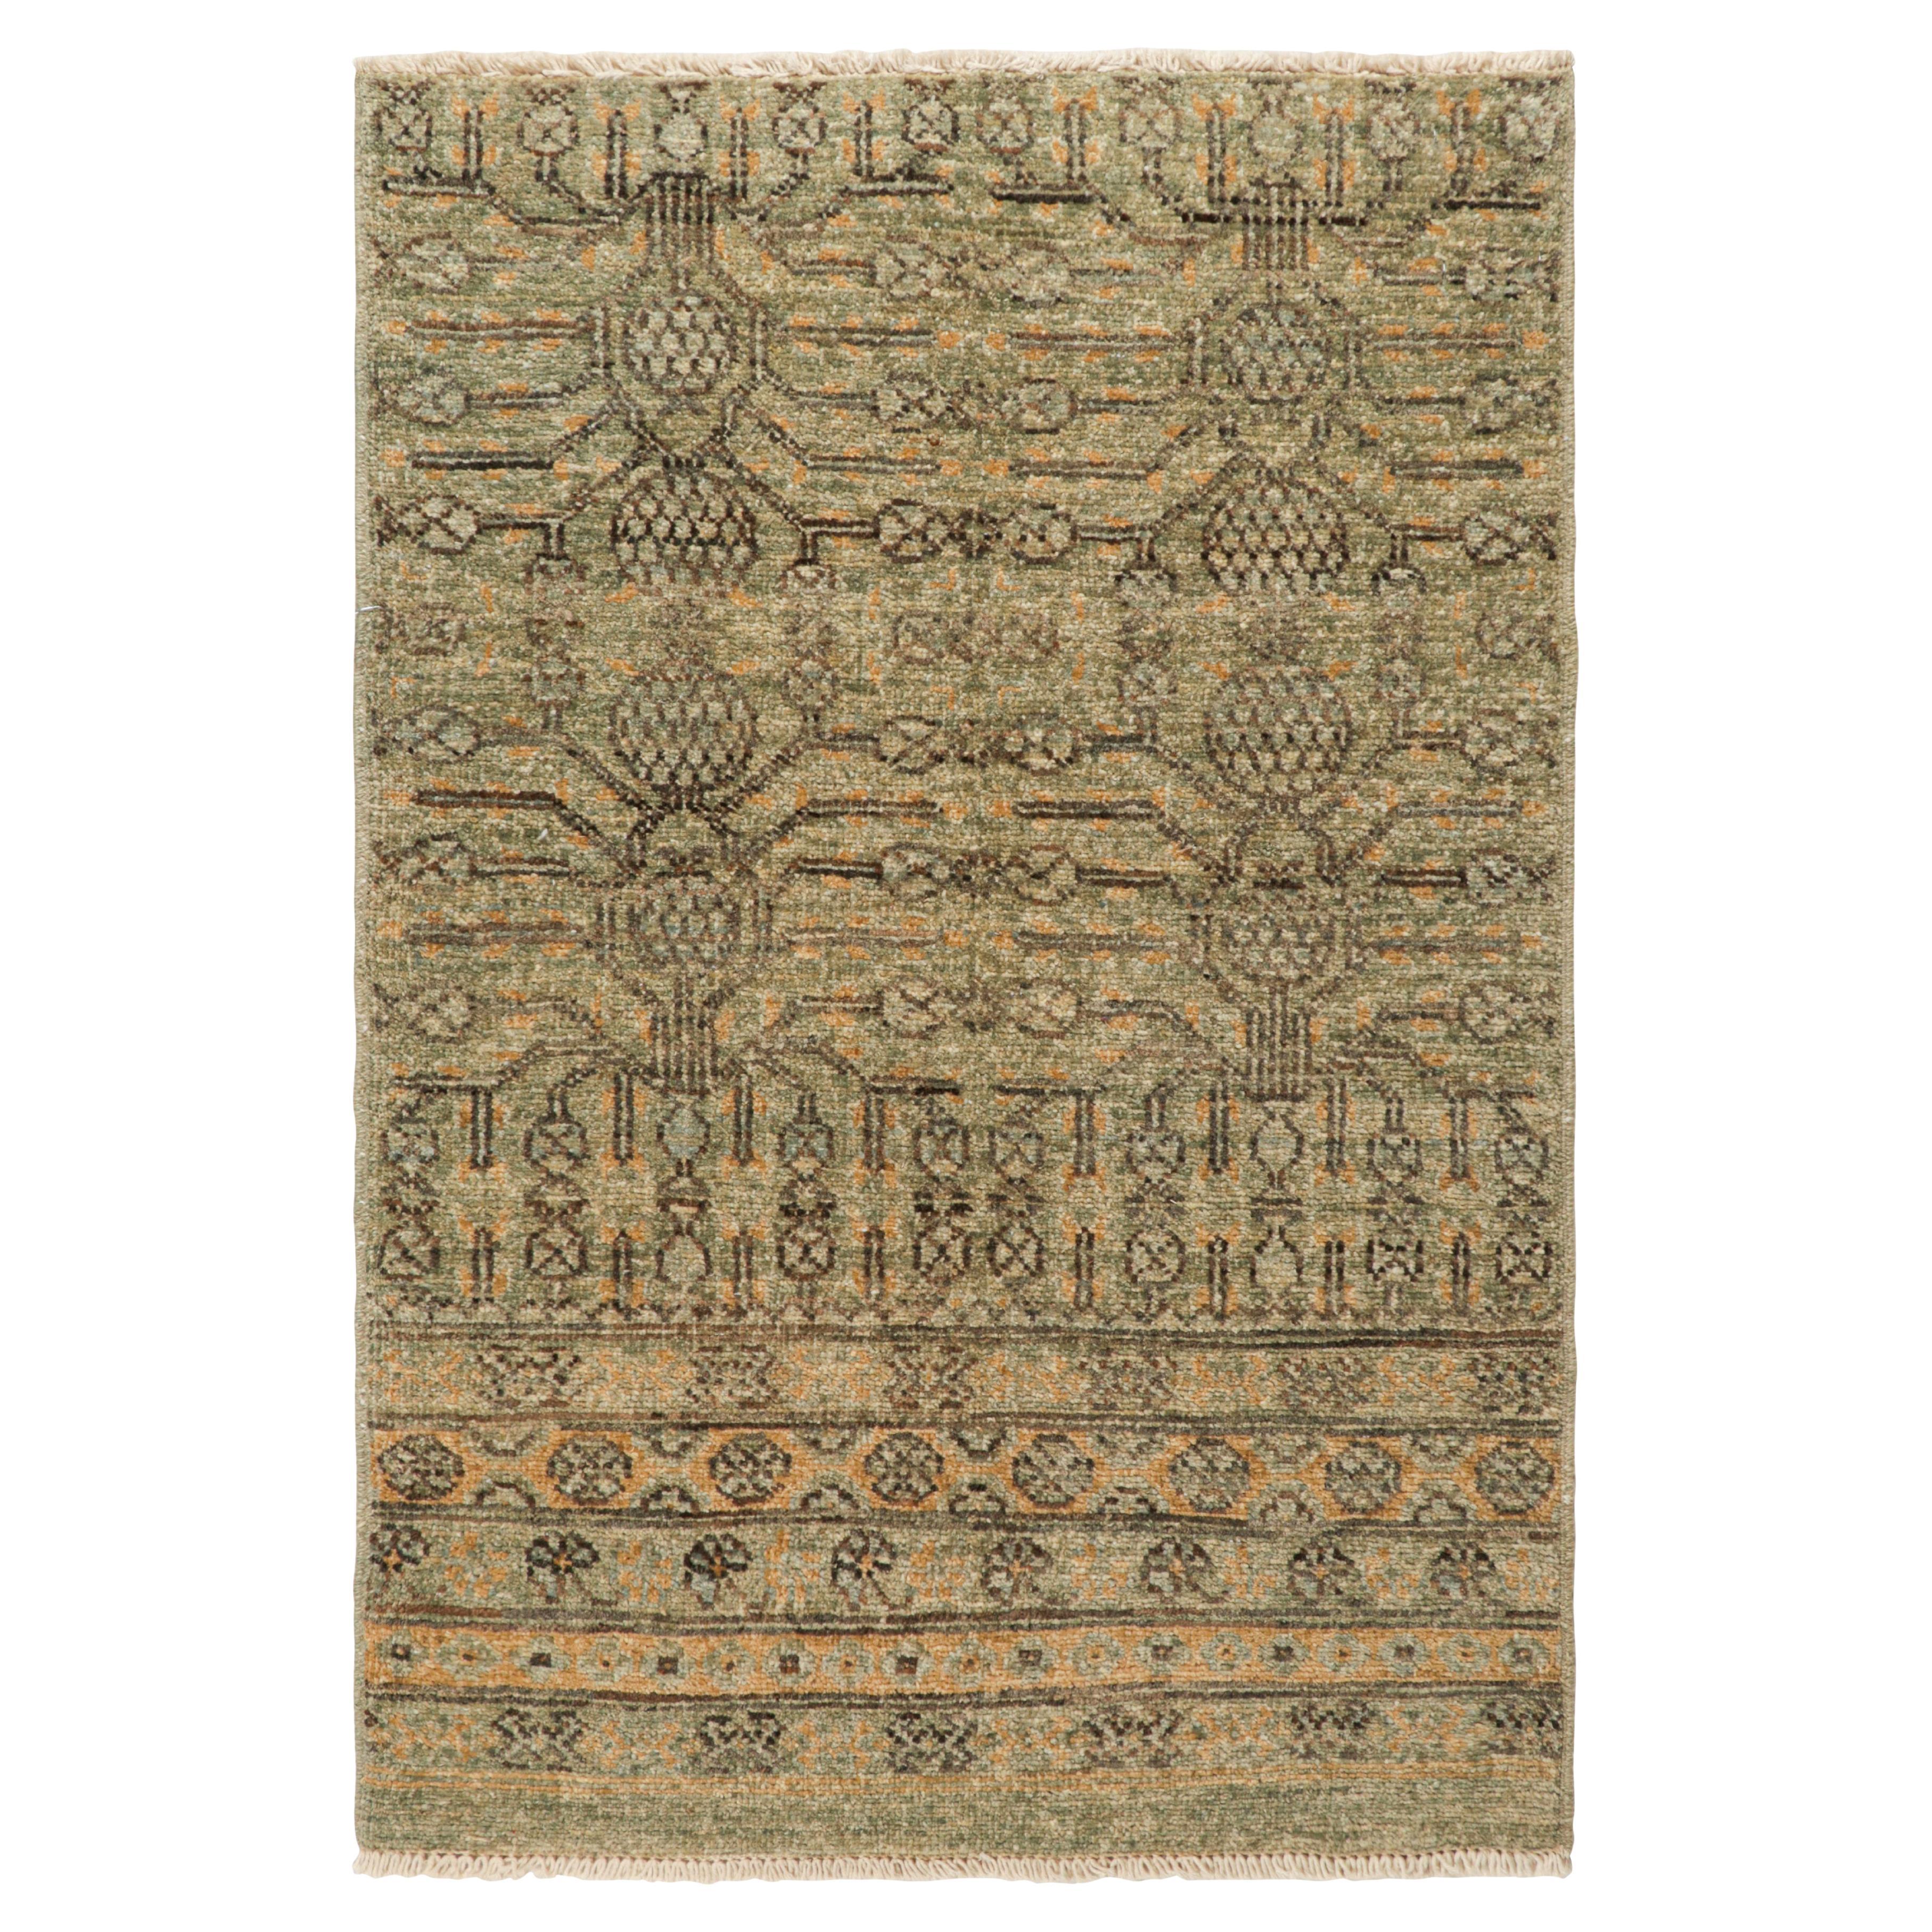 Rug & Kilim’s Khotan Style Rug in Green and Gold with Pomegranate Patterns For Sale